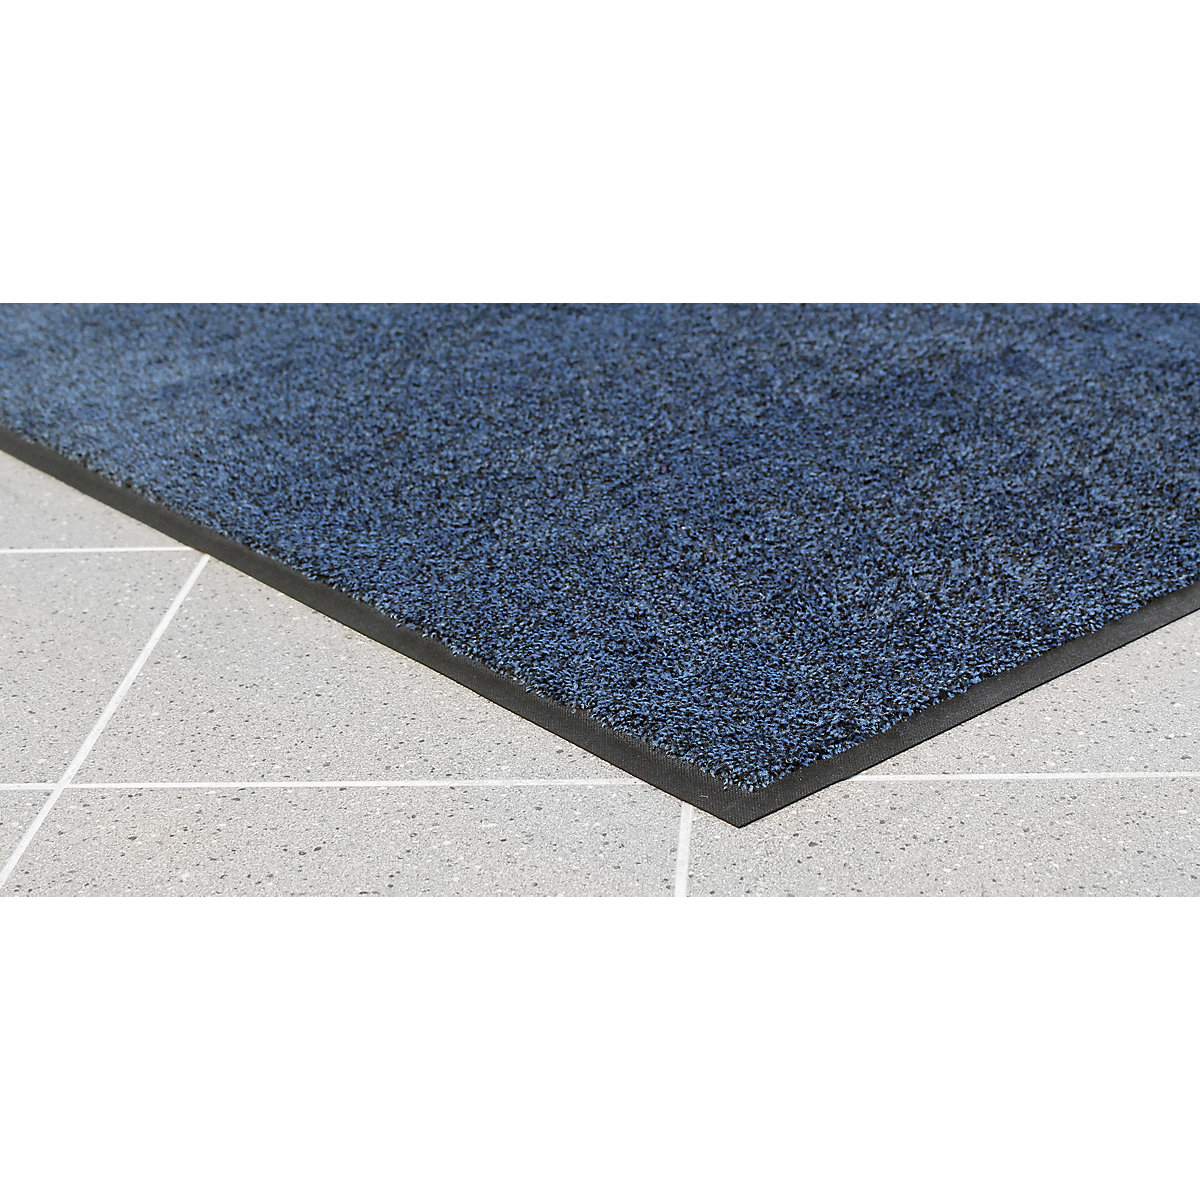 Entrance matting for indoor use, nylon pile, LxW 1500 x 850 mm, blue